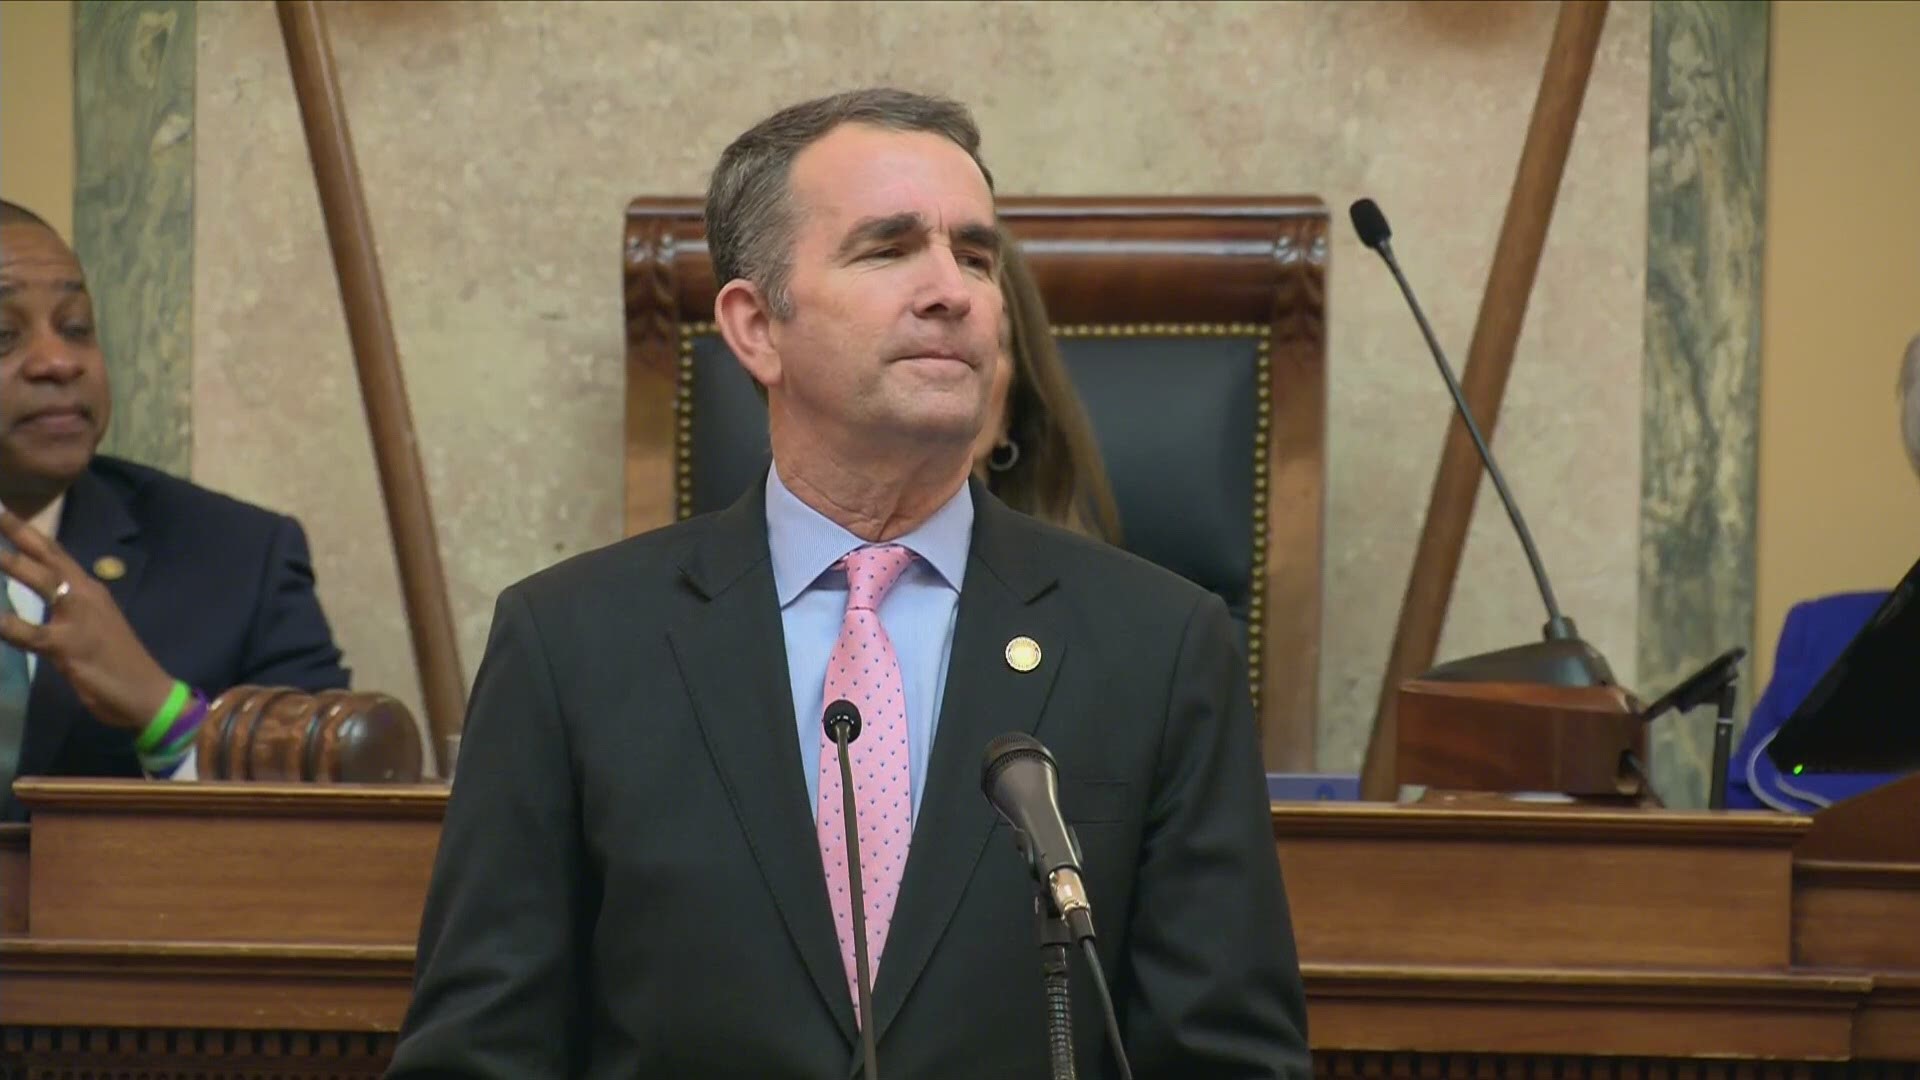 Gov. Ralph Northam said in his State of the Commonwealth address that he wants to decriminalization marijuana in Virginia.